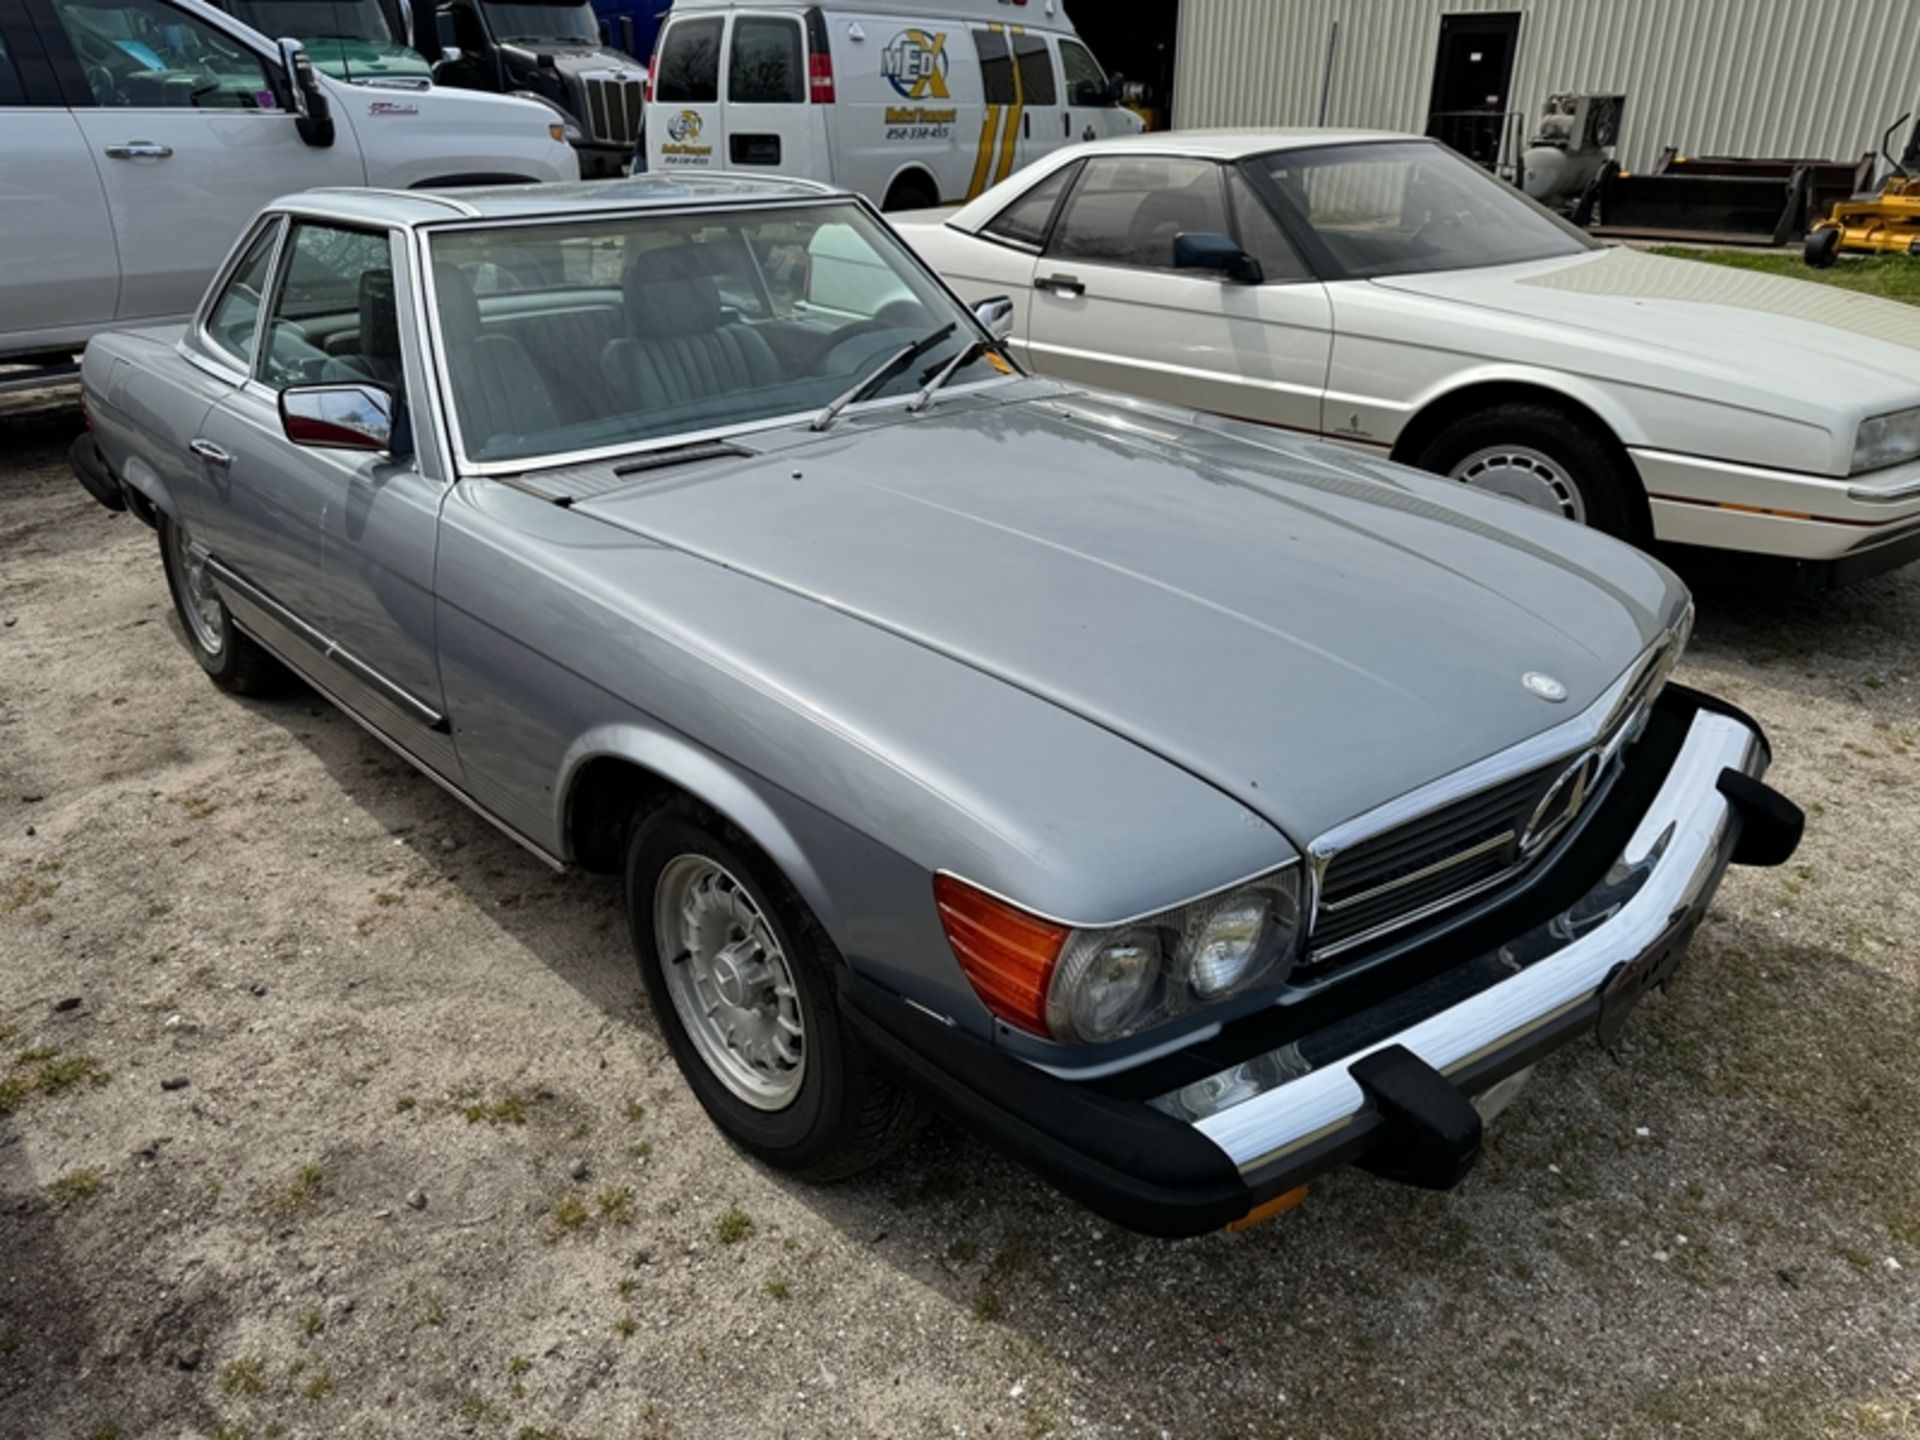 1984 MERCEDES 380SL - 116,262 miles showing - WDBBA45A7EA009891 - Image 2 of 6